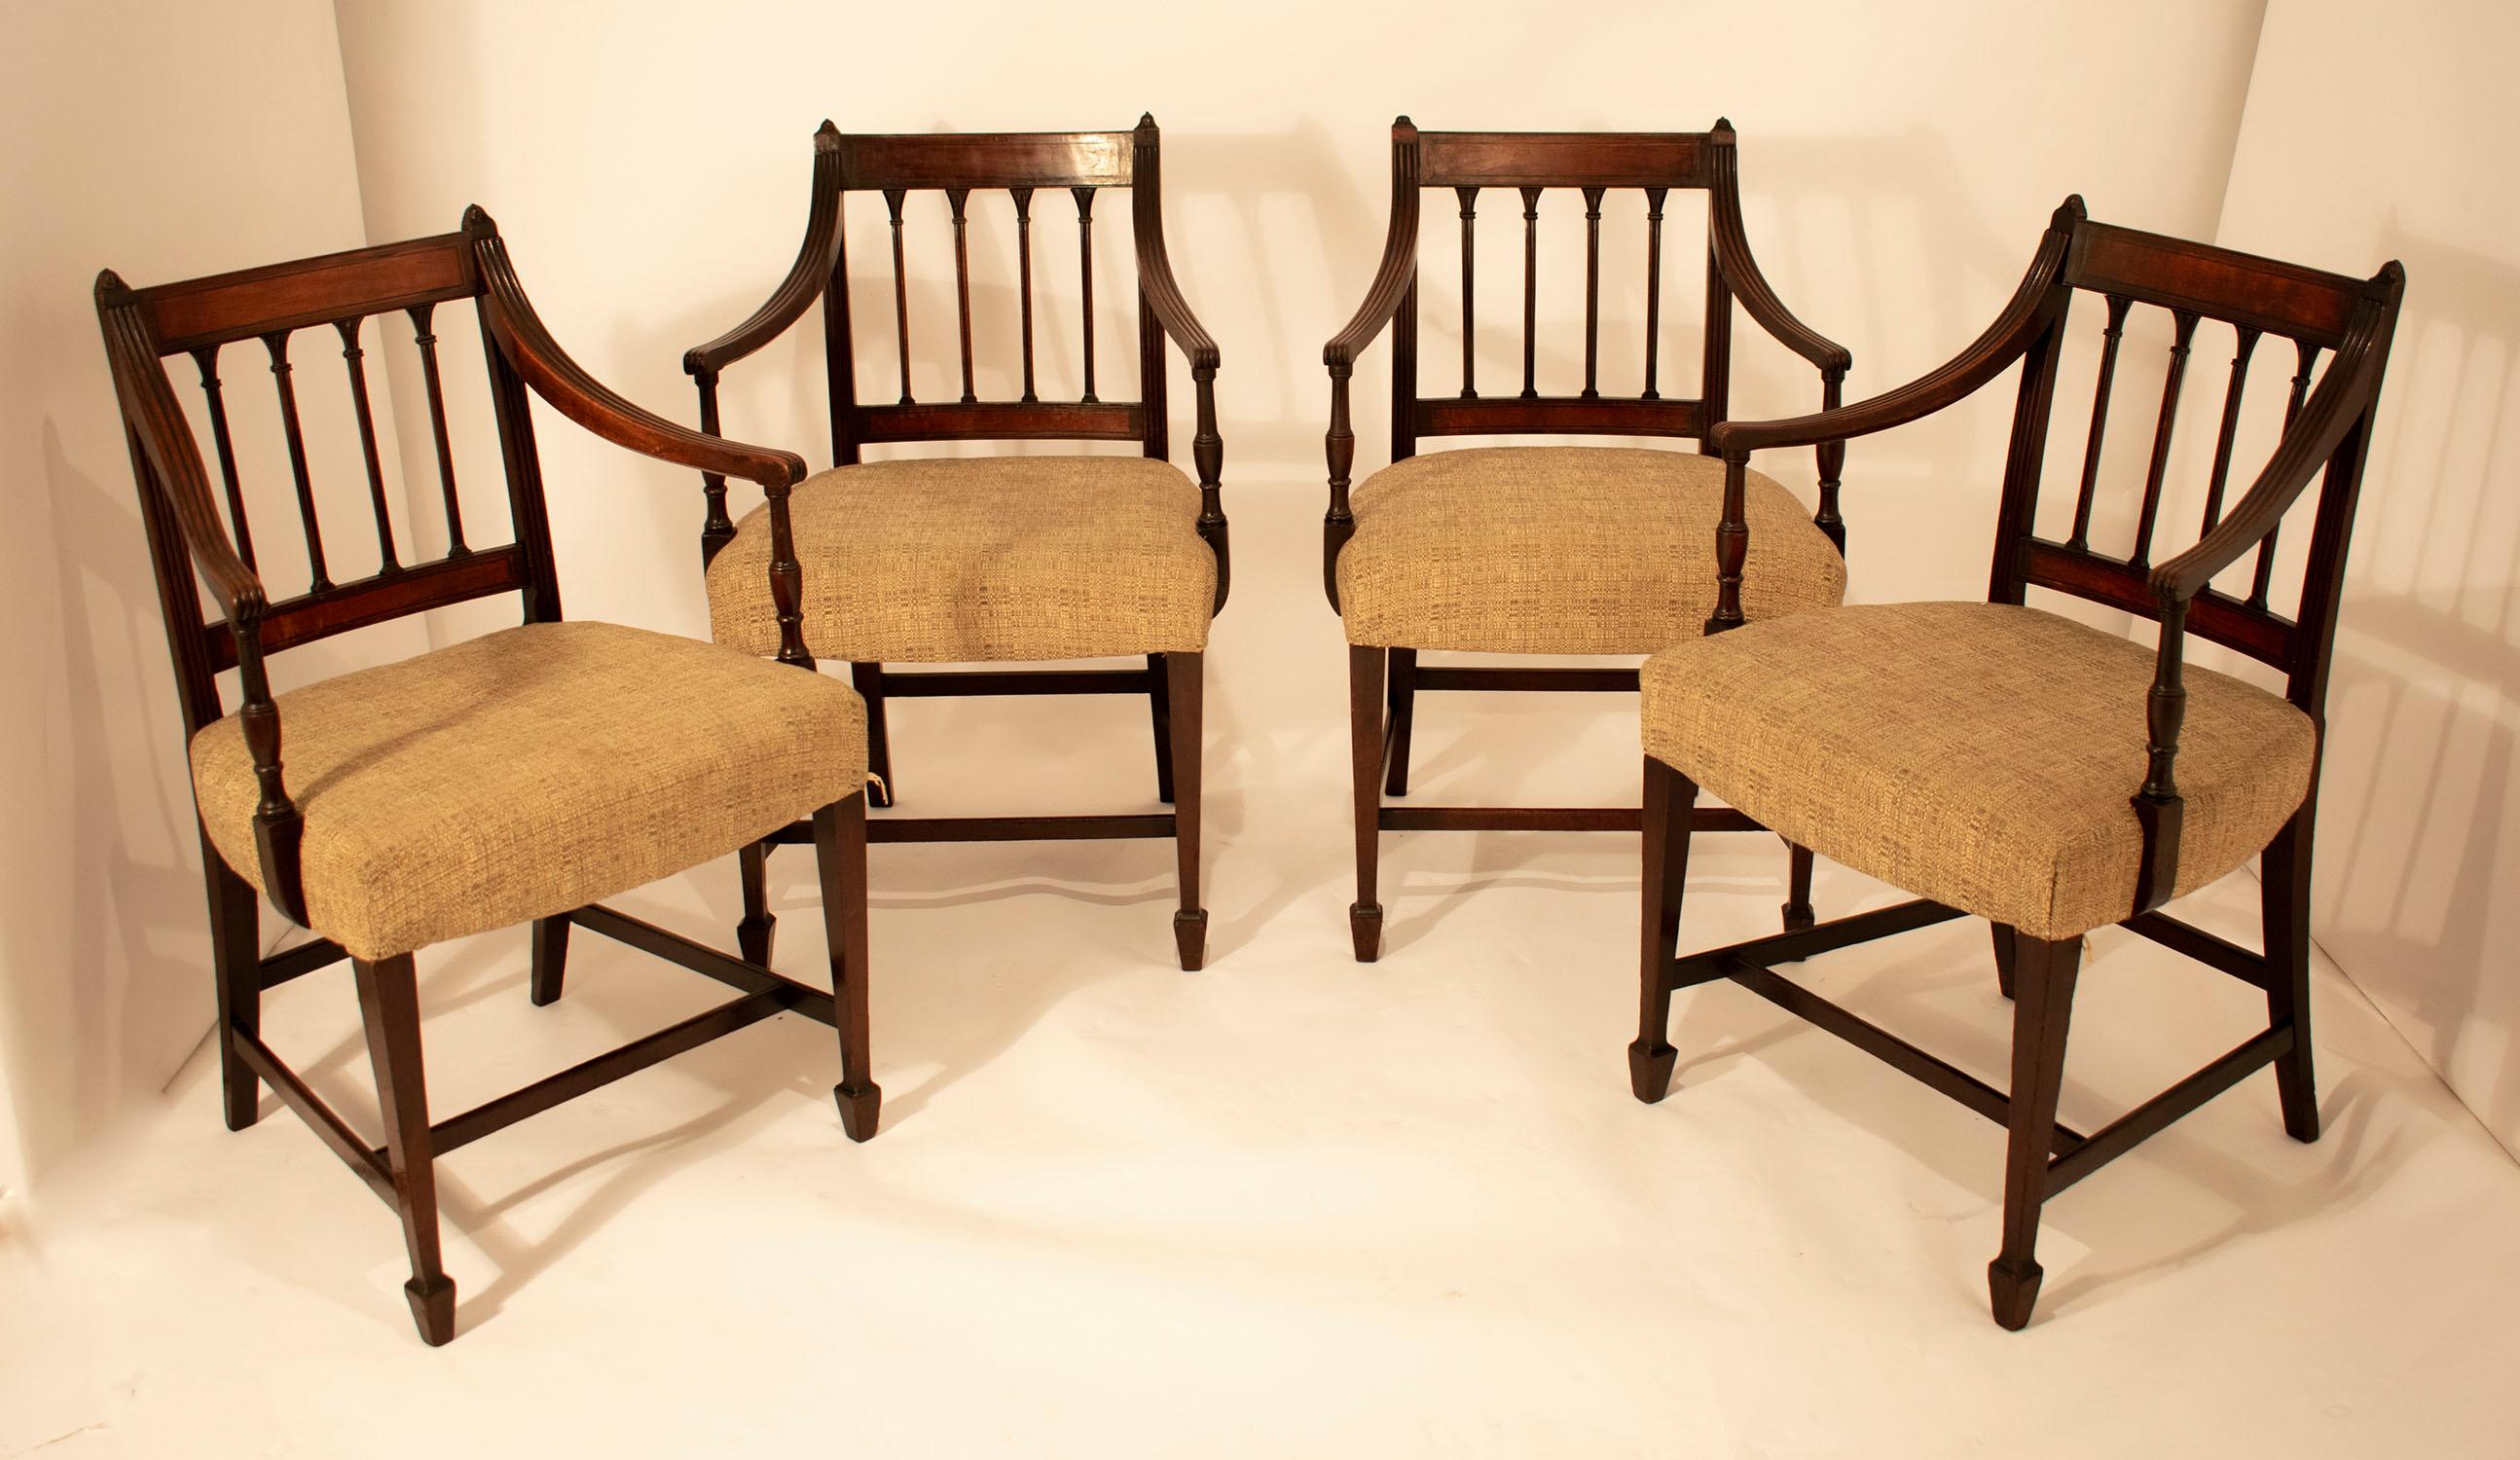 Set of four dining chairs. George III, circa 1790.
They are made in walnut and the textile is from the 1990s.
Including carvers with satinwood inlay to the curved bar backs.
Bought in London in the 1980s at Christie's auction